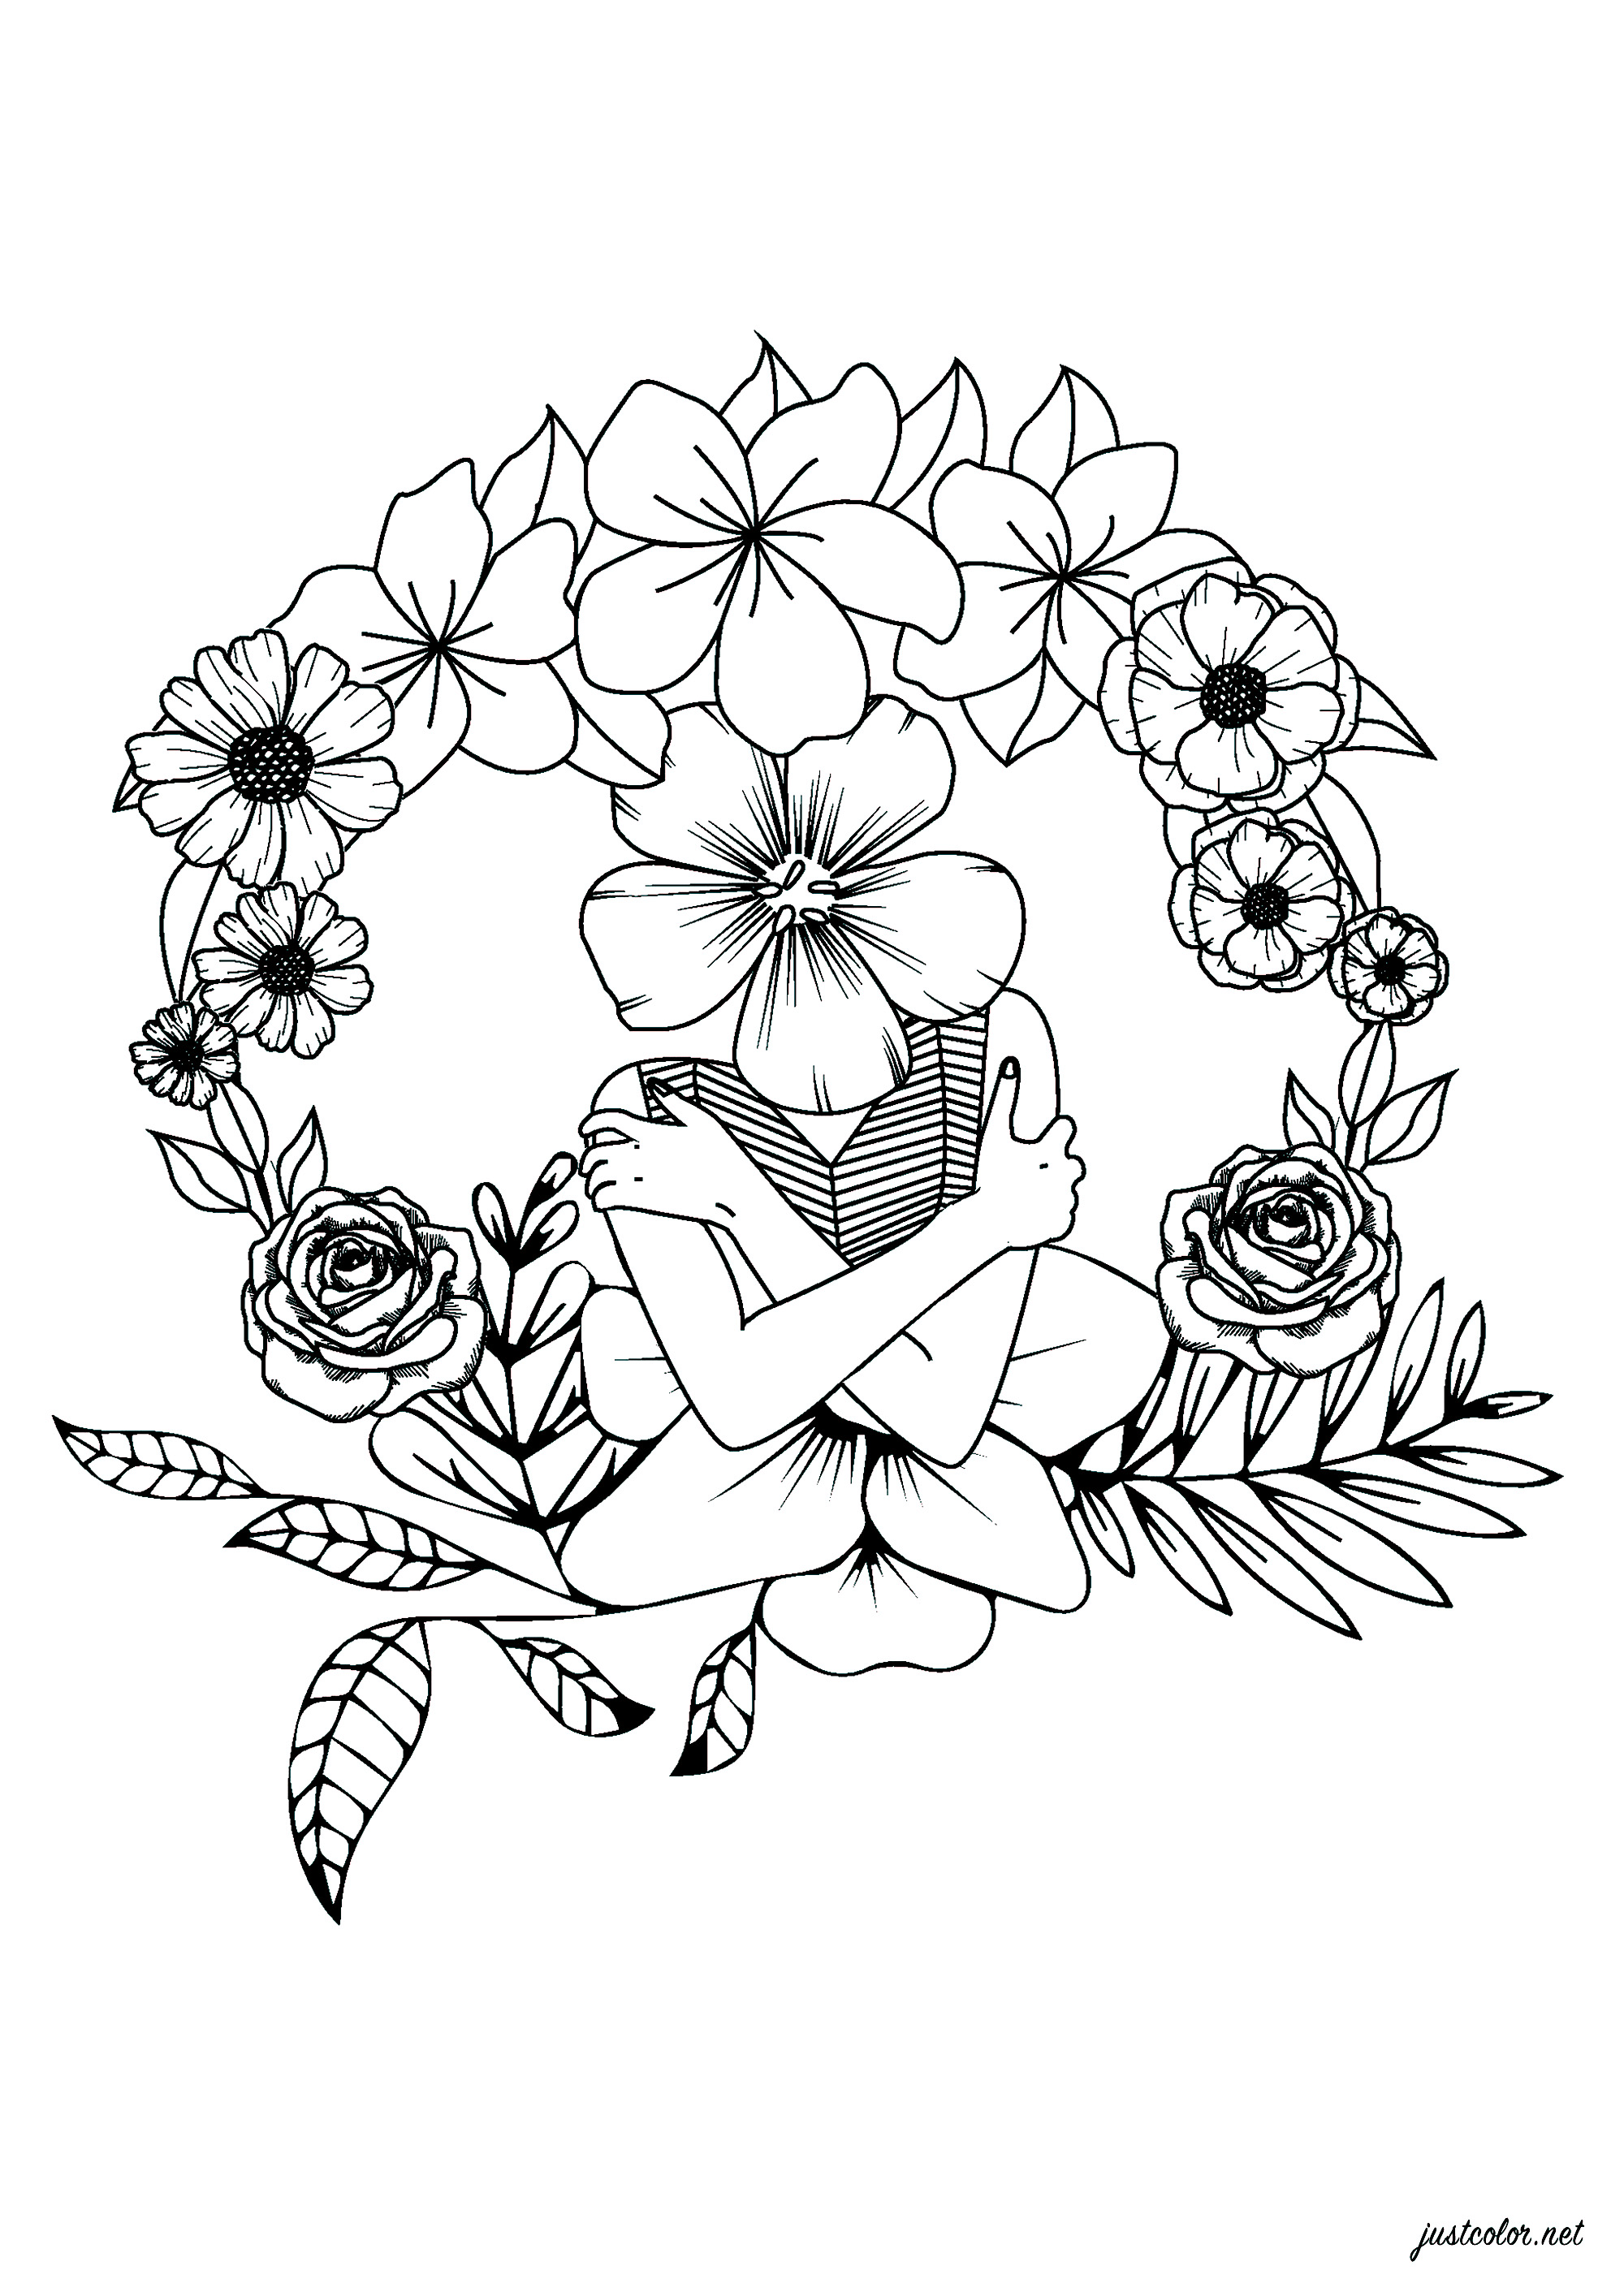 Coloring page of a woman with a flower head, surrounded by a very elegant floral crown